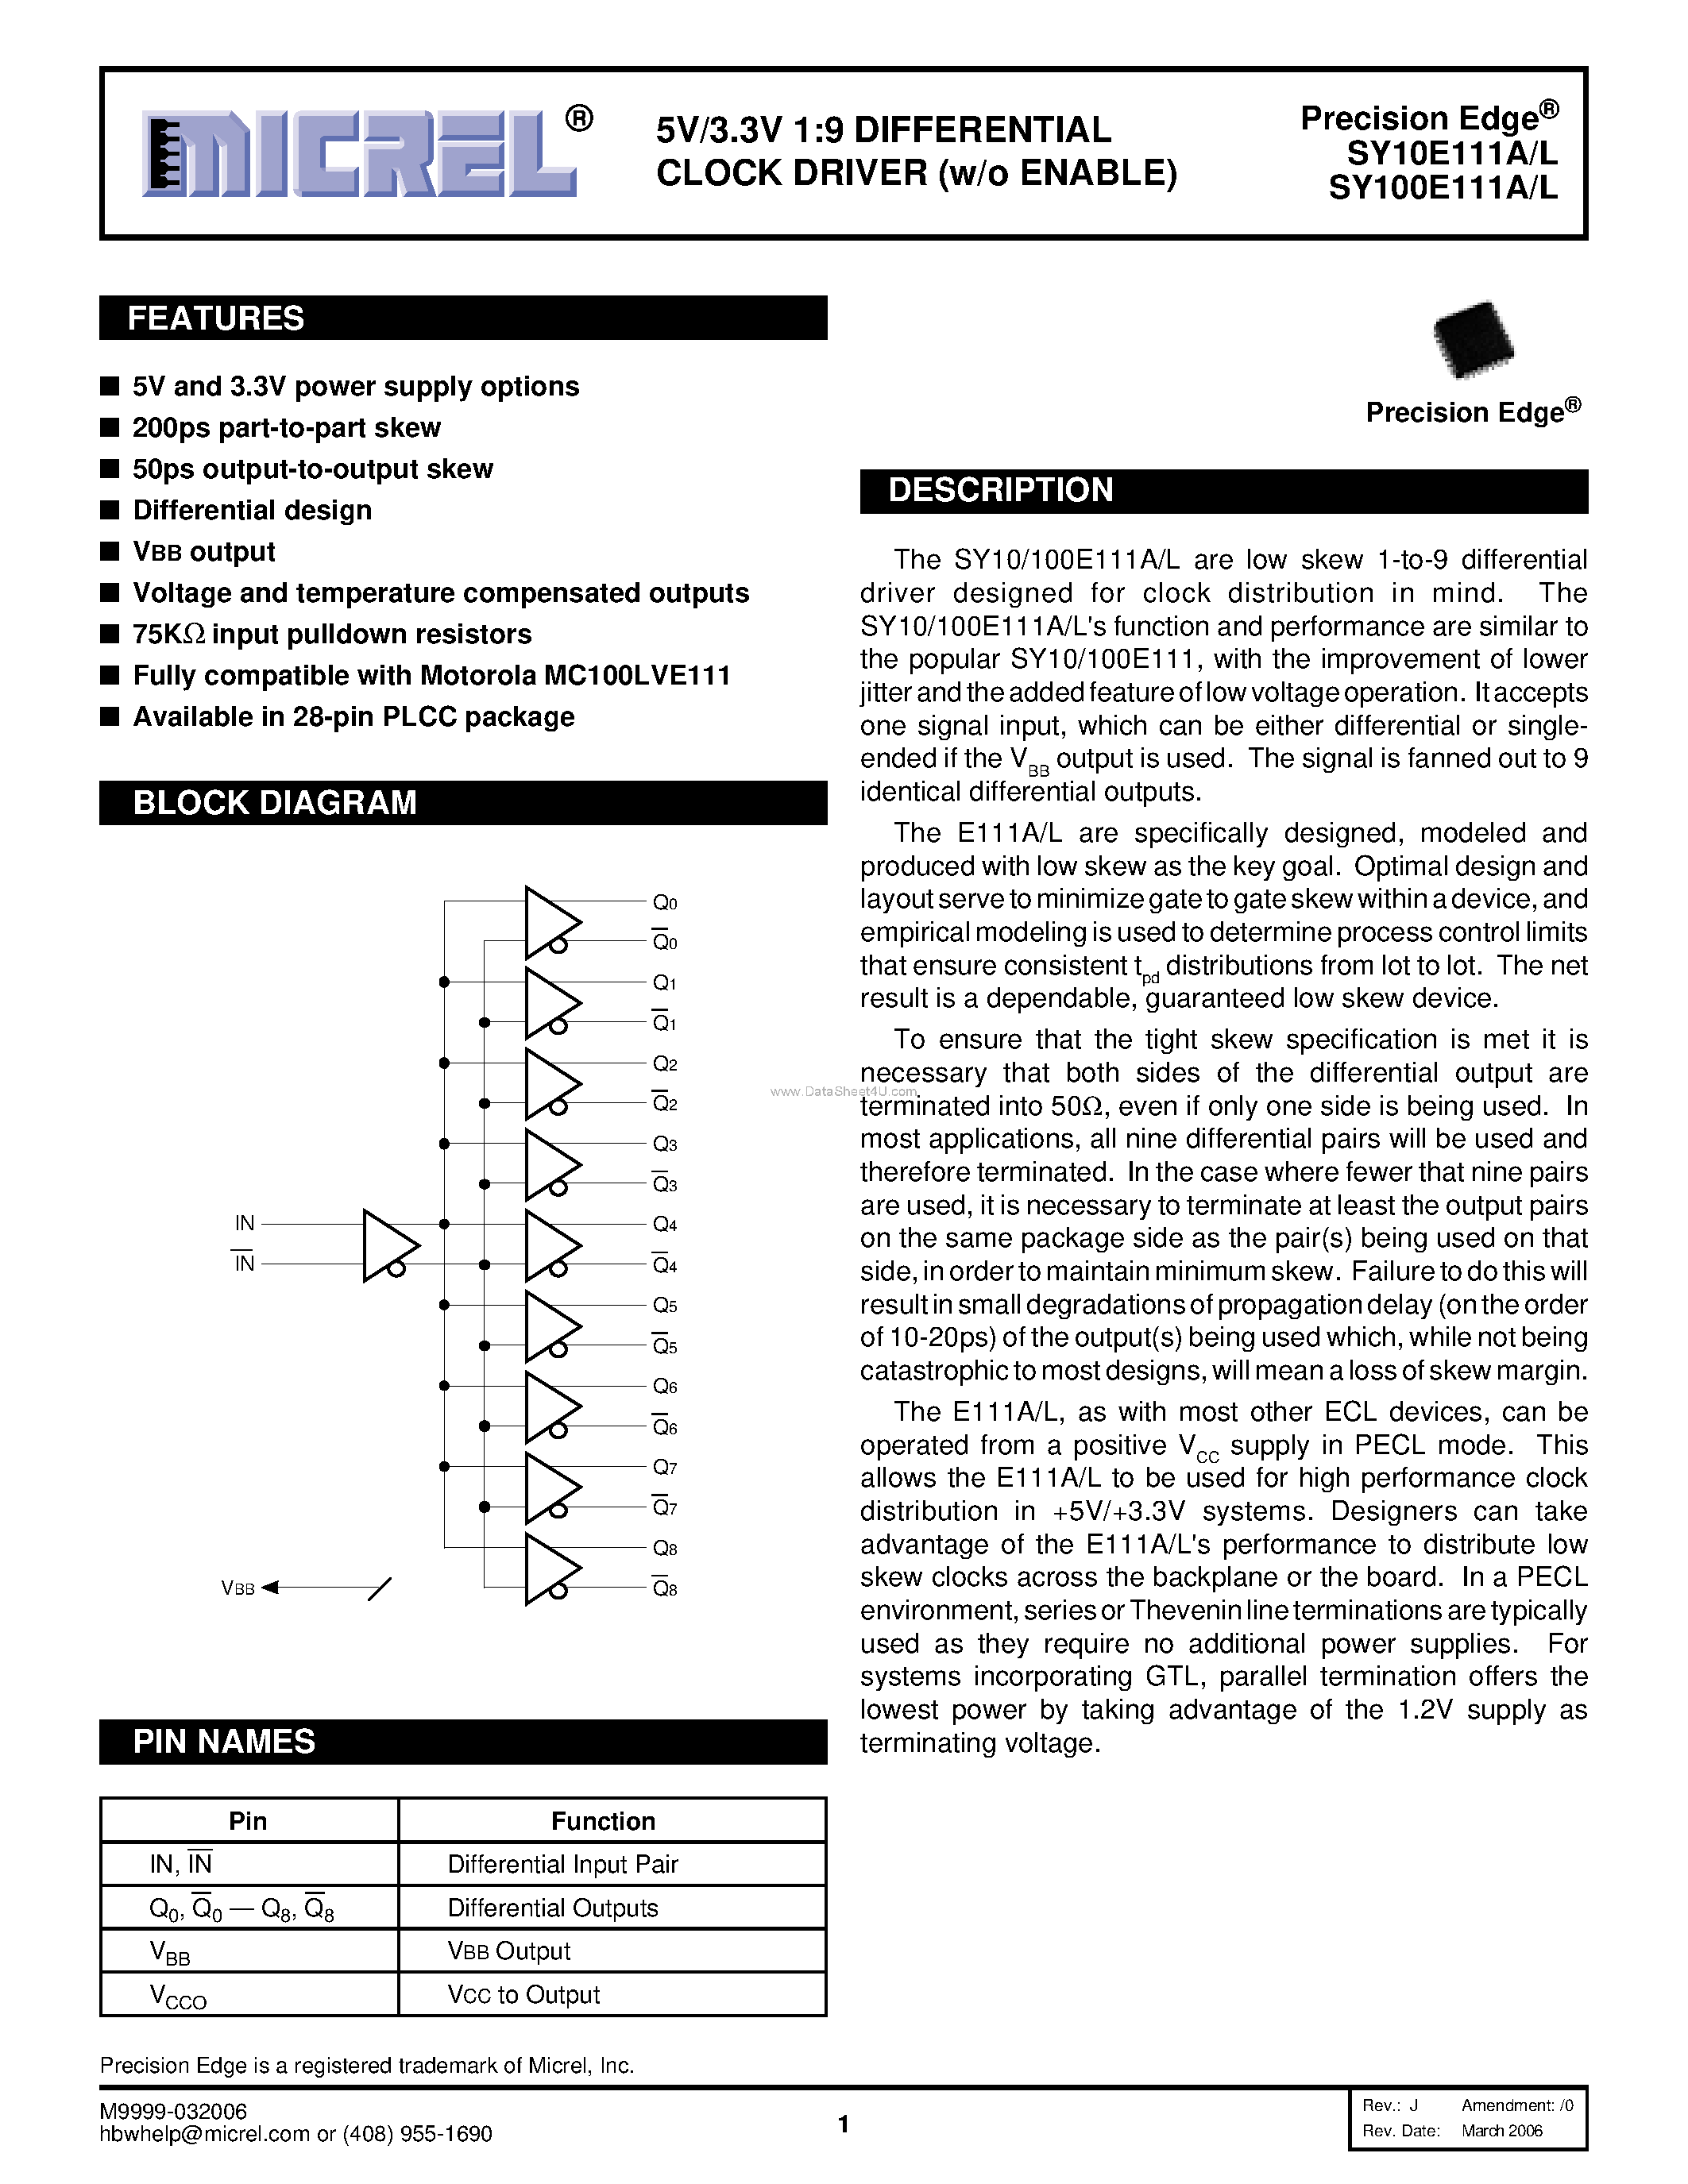 Datasheet SY100E111A - 1:9 DIFFERENTIAL CLOCK DRIVER page 1